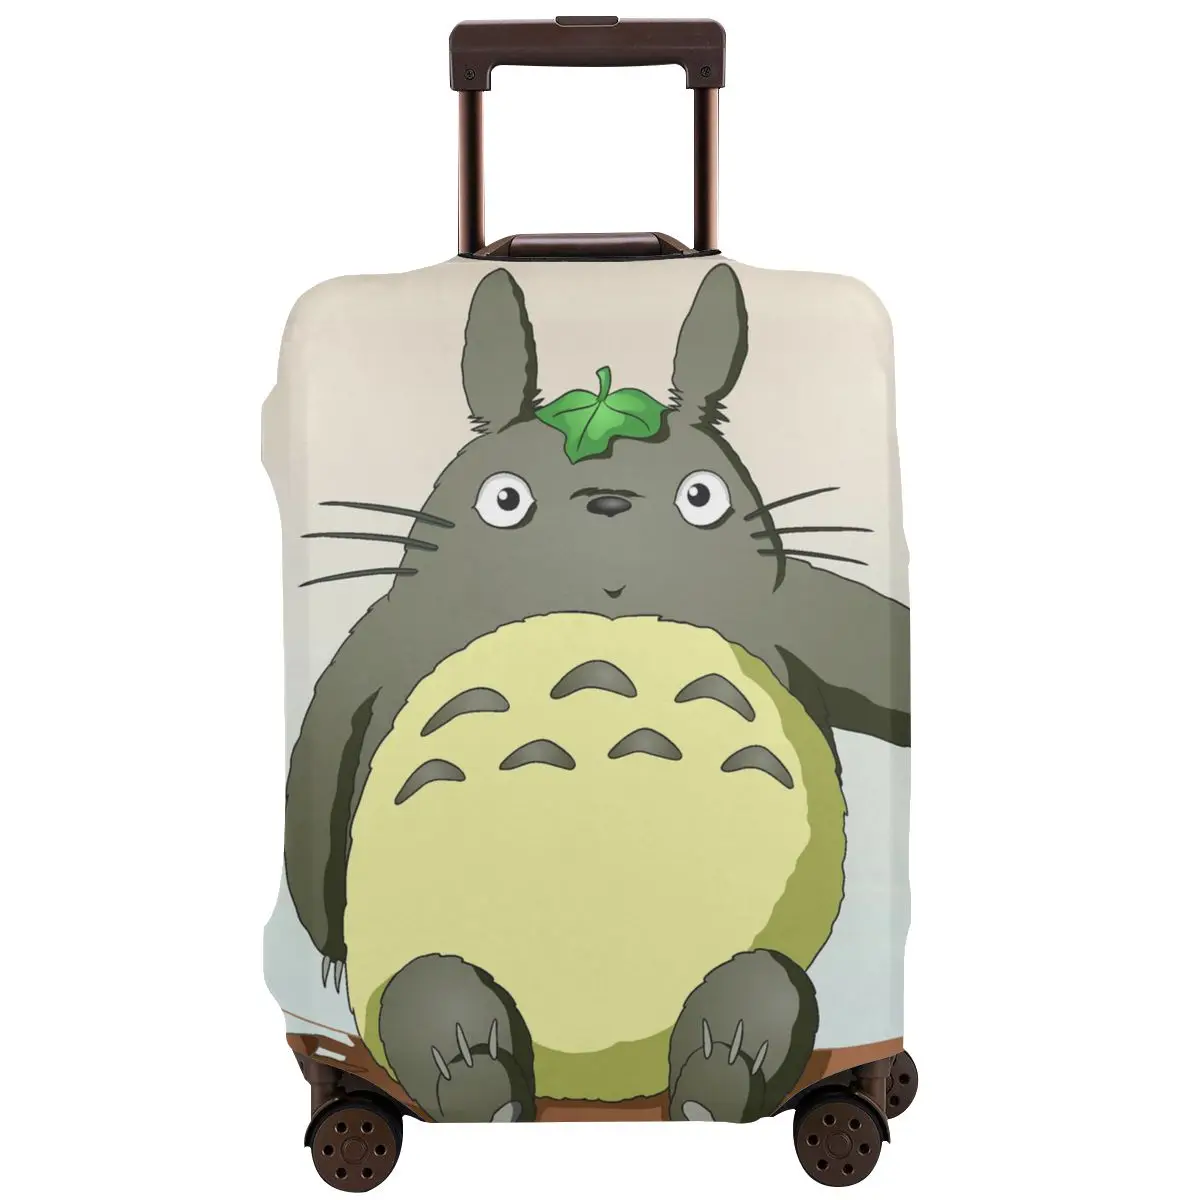 

Draw Totoro Travel Suitcase Luggage Case Washable Luggage Protective Cover Elastic Anti-Scratch Cover Protector Trolley